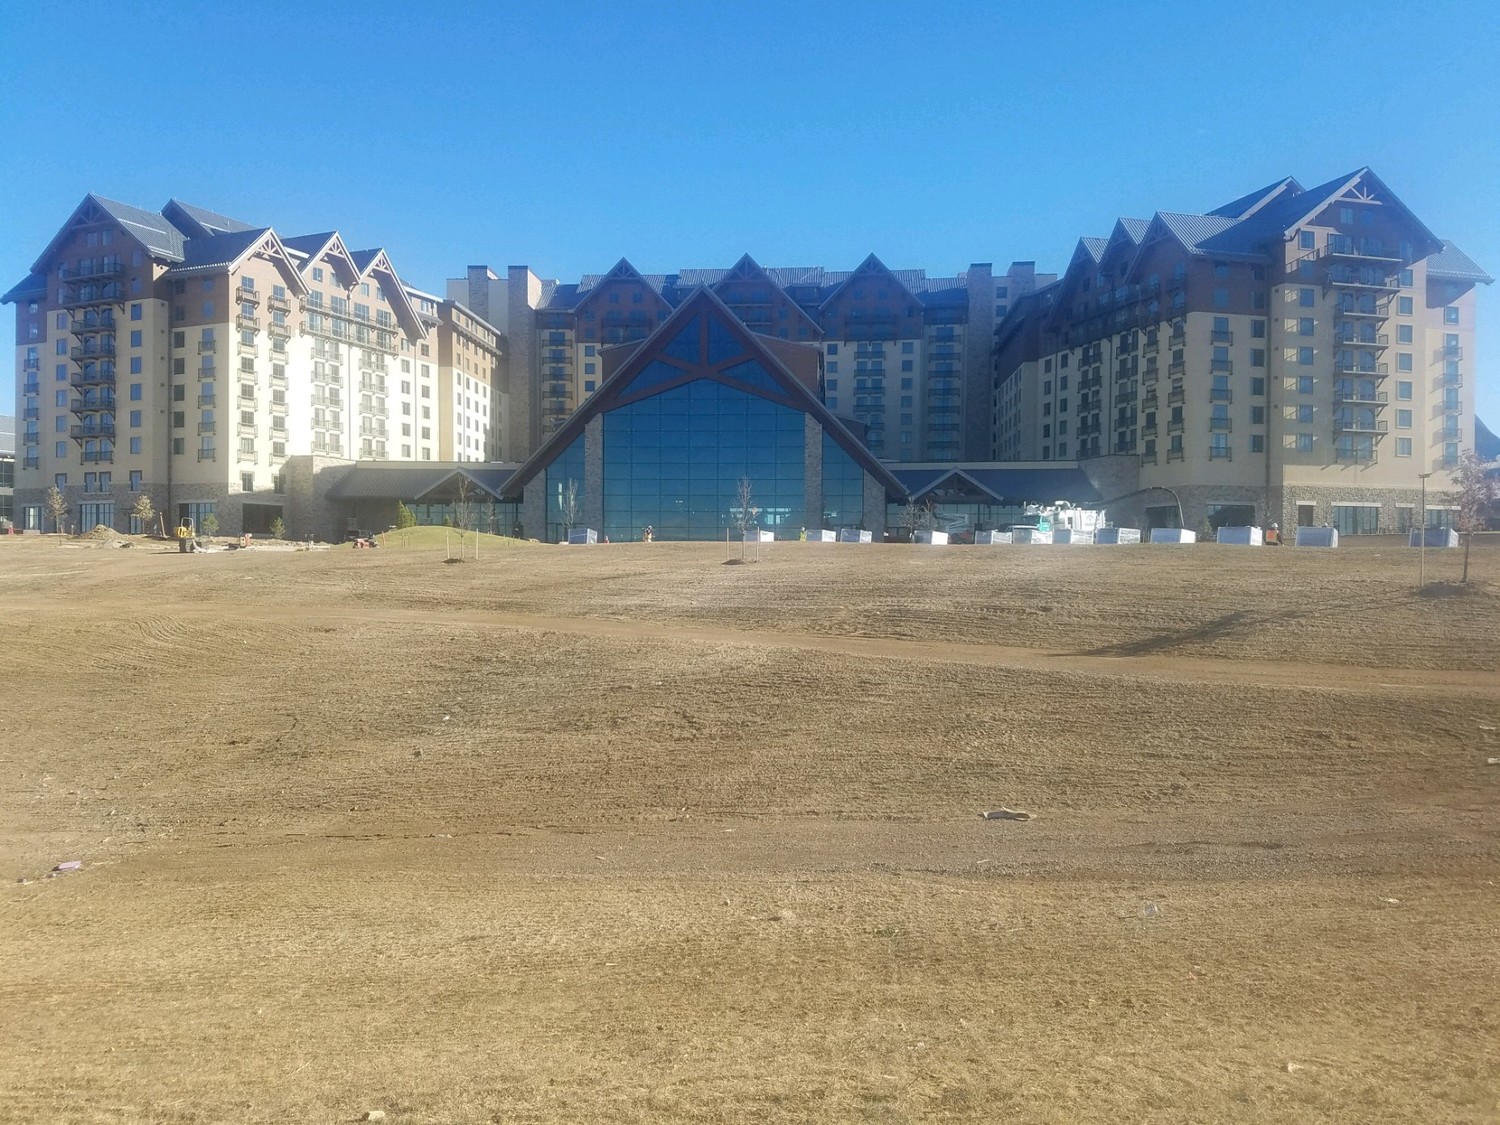 Gaylord Rockies Resort and Convention Center. Photo courtesy of Dewberry.